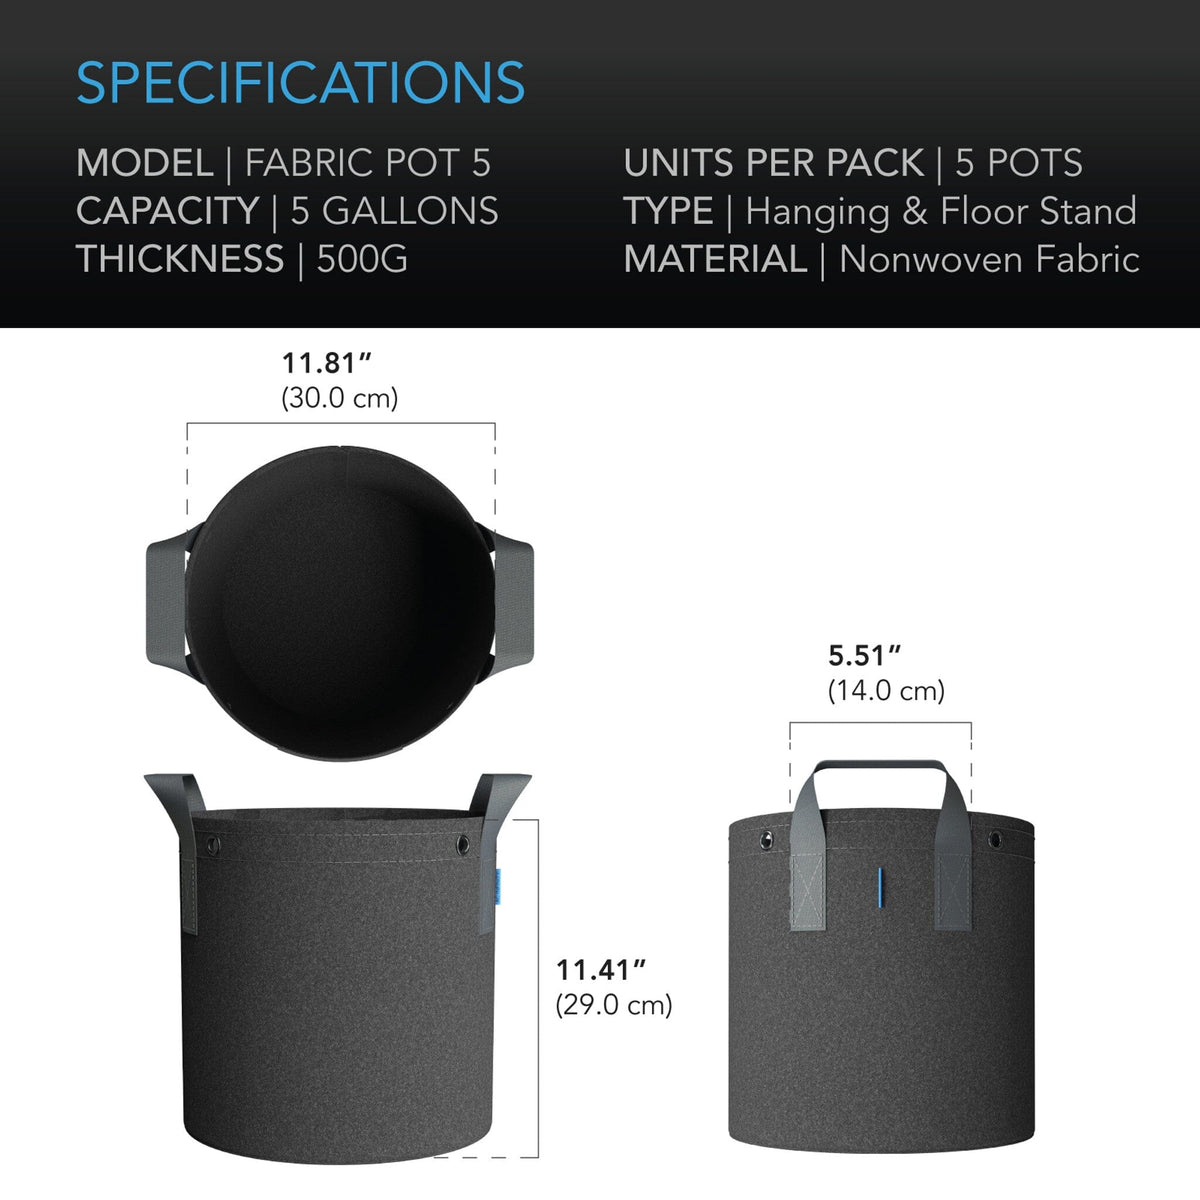 5 Gallon Fabric pot specifications